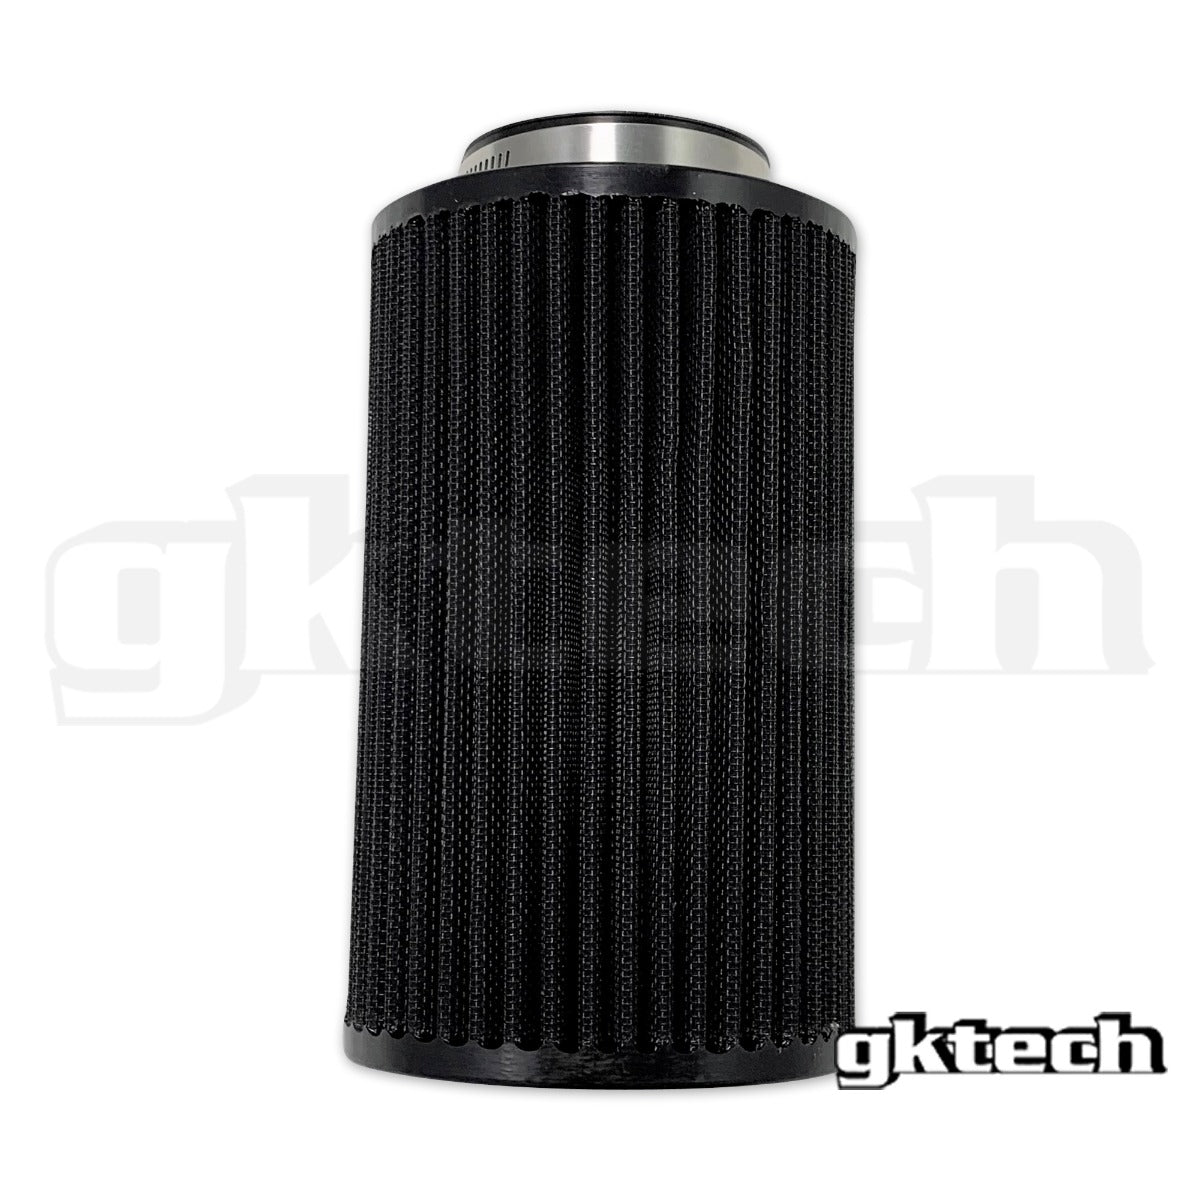 Replacement pod filter for 370z Cold Air Intake